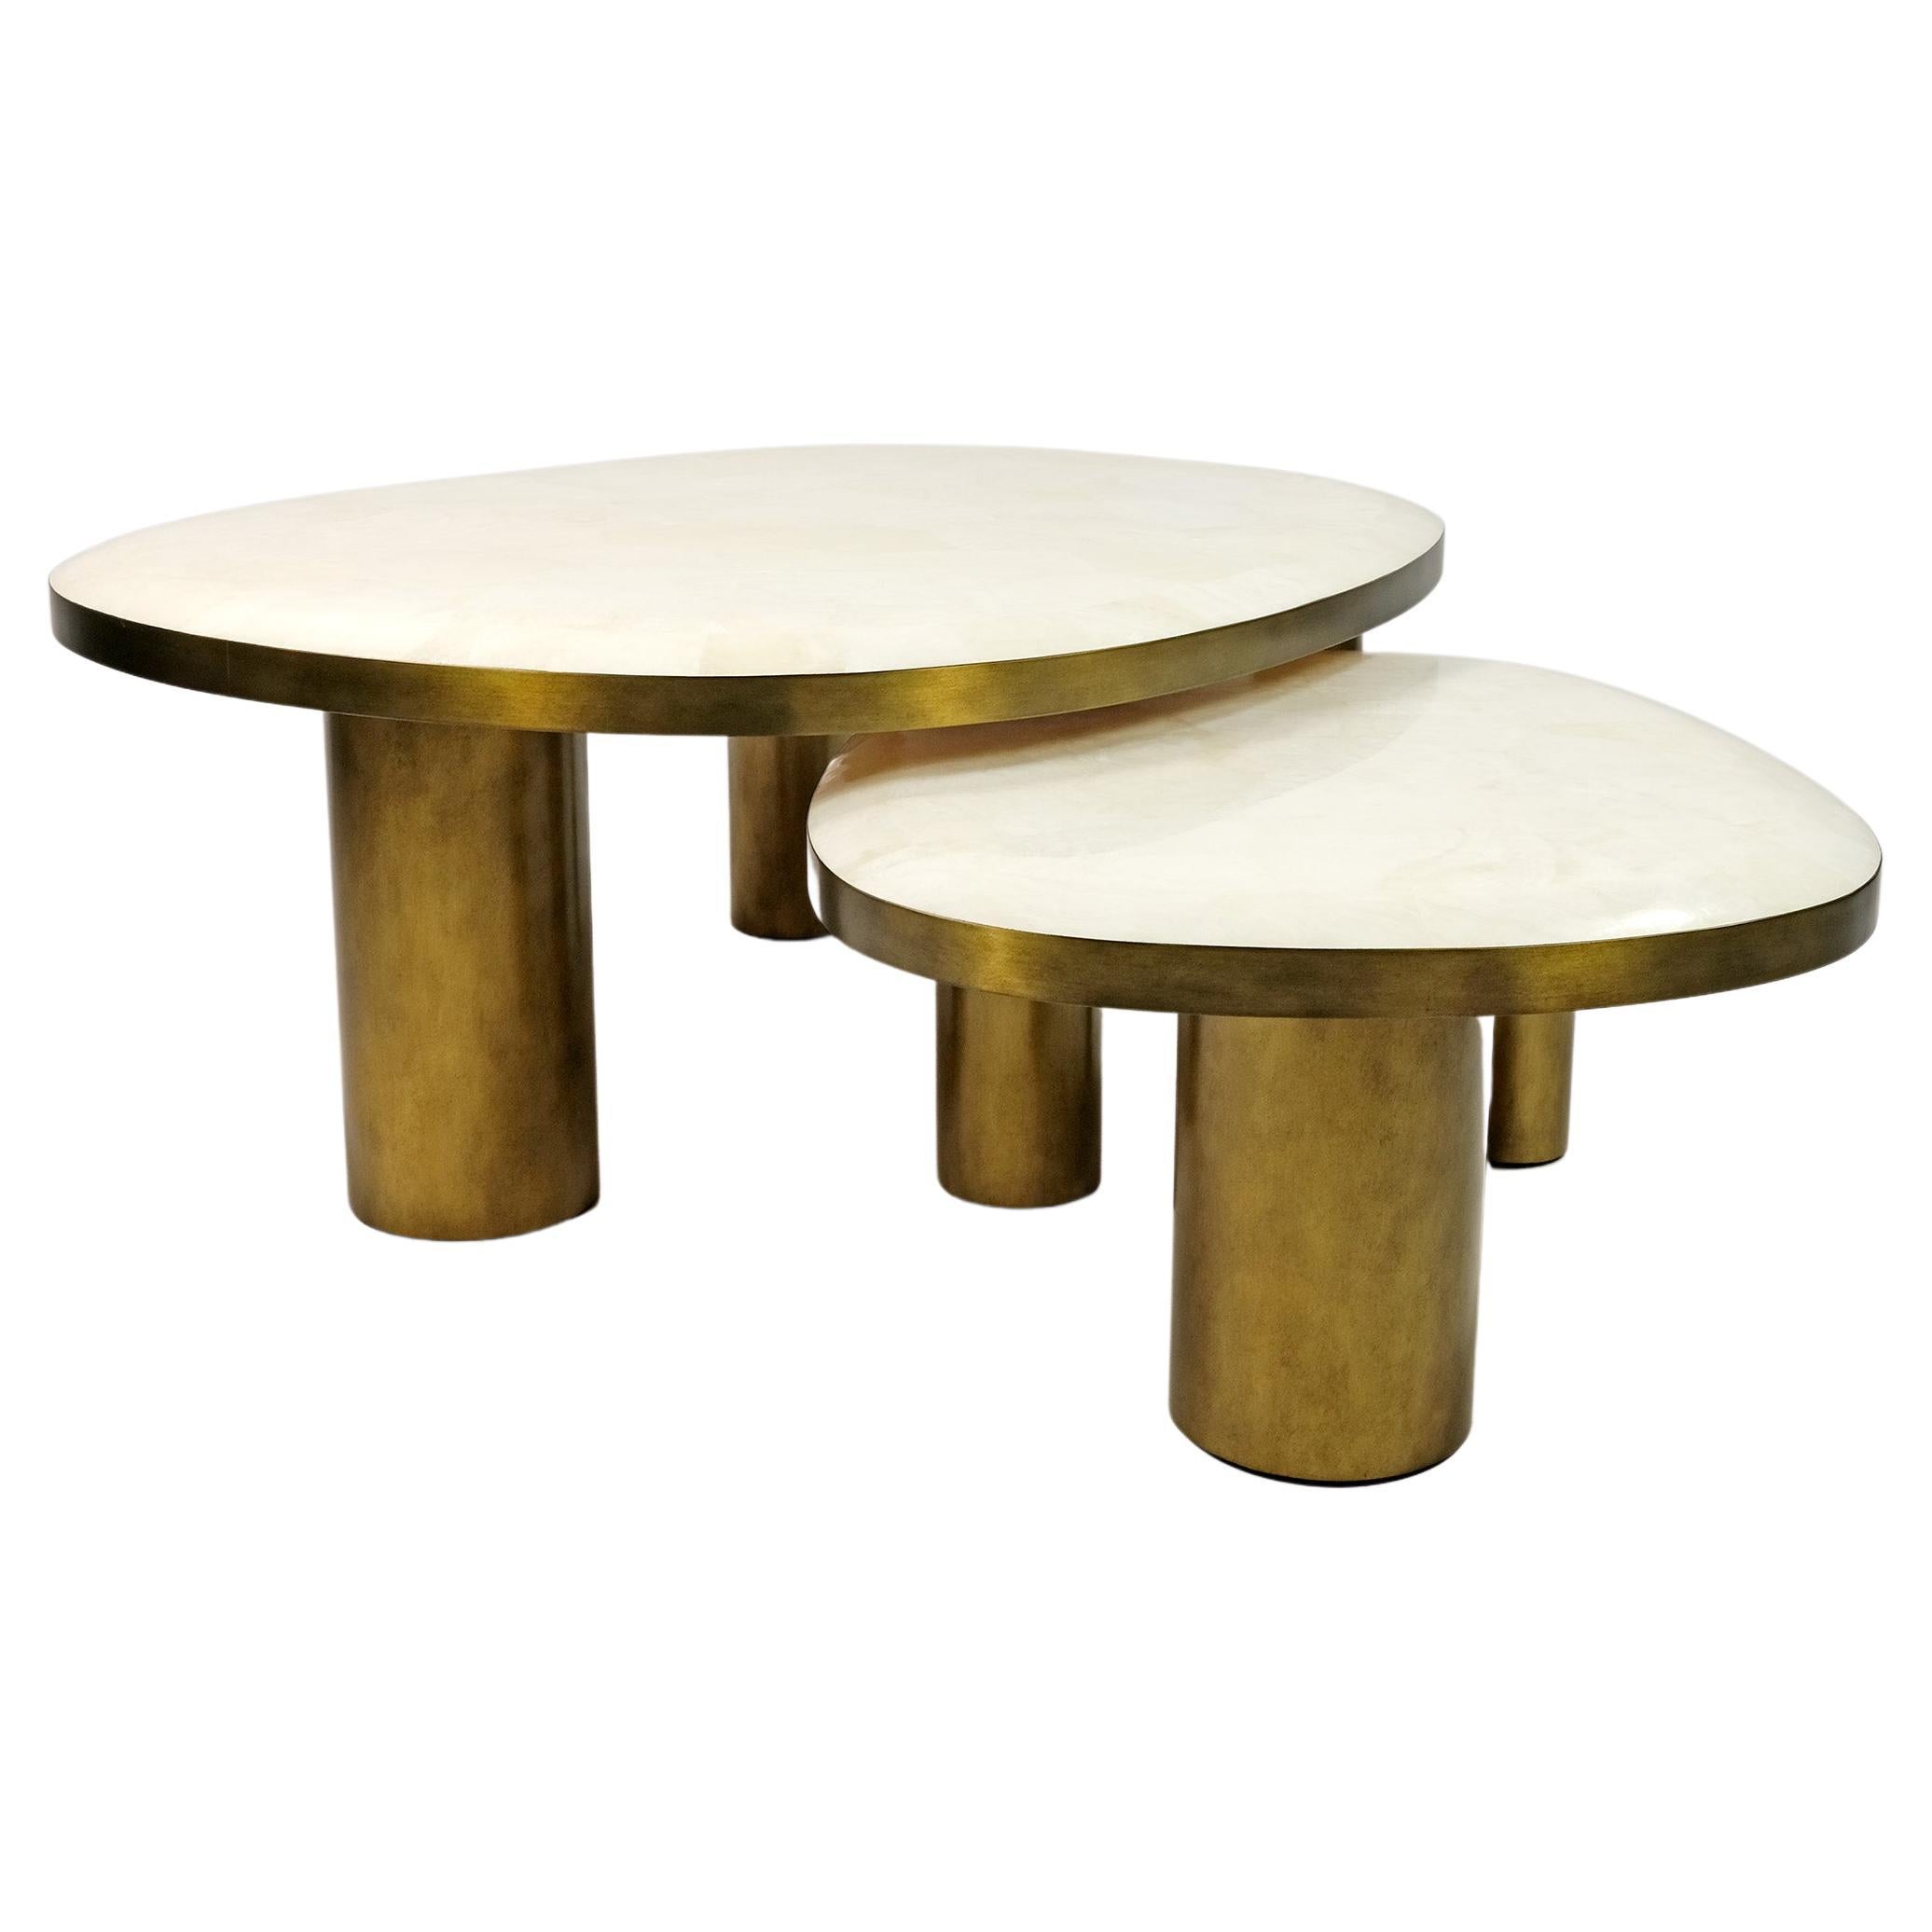 Set of 2 Organic Coffee Tables in Rock Crystal and Brass by Ginger Brown For Sale